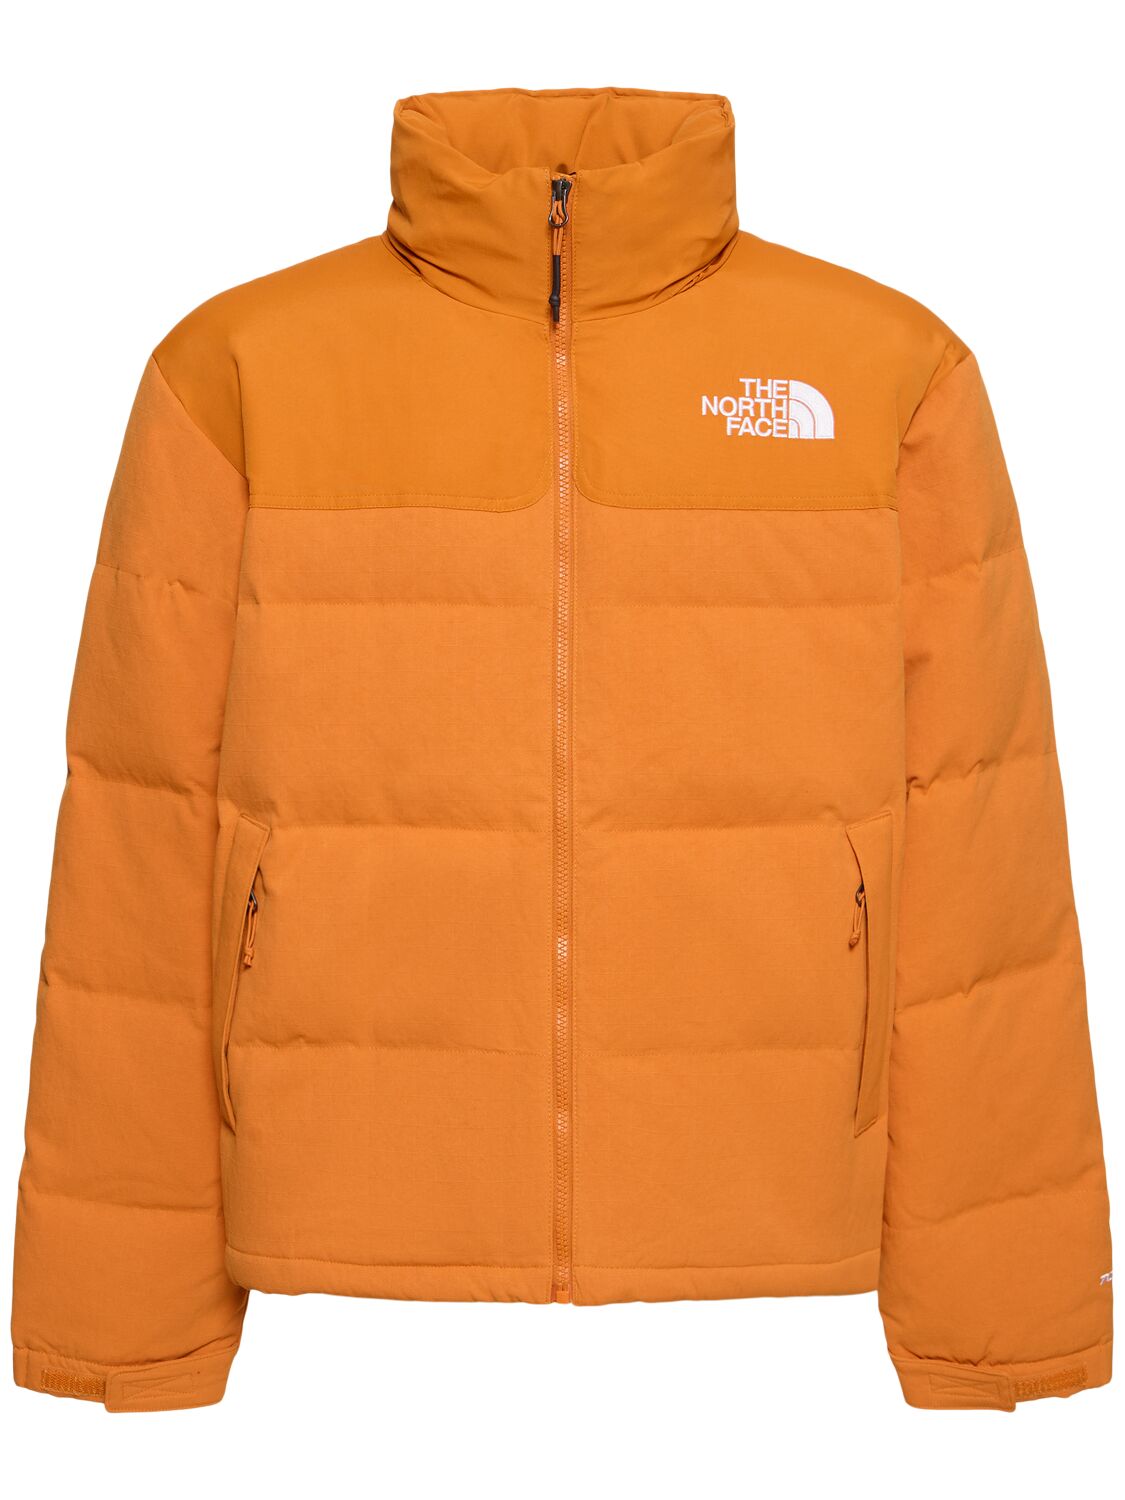 THE NORTH FACE 92 CRINKLE羽绒服